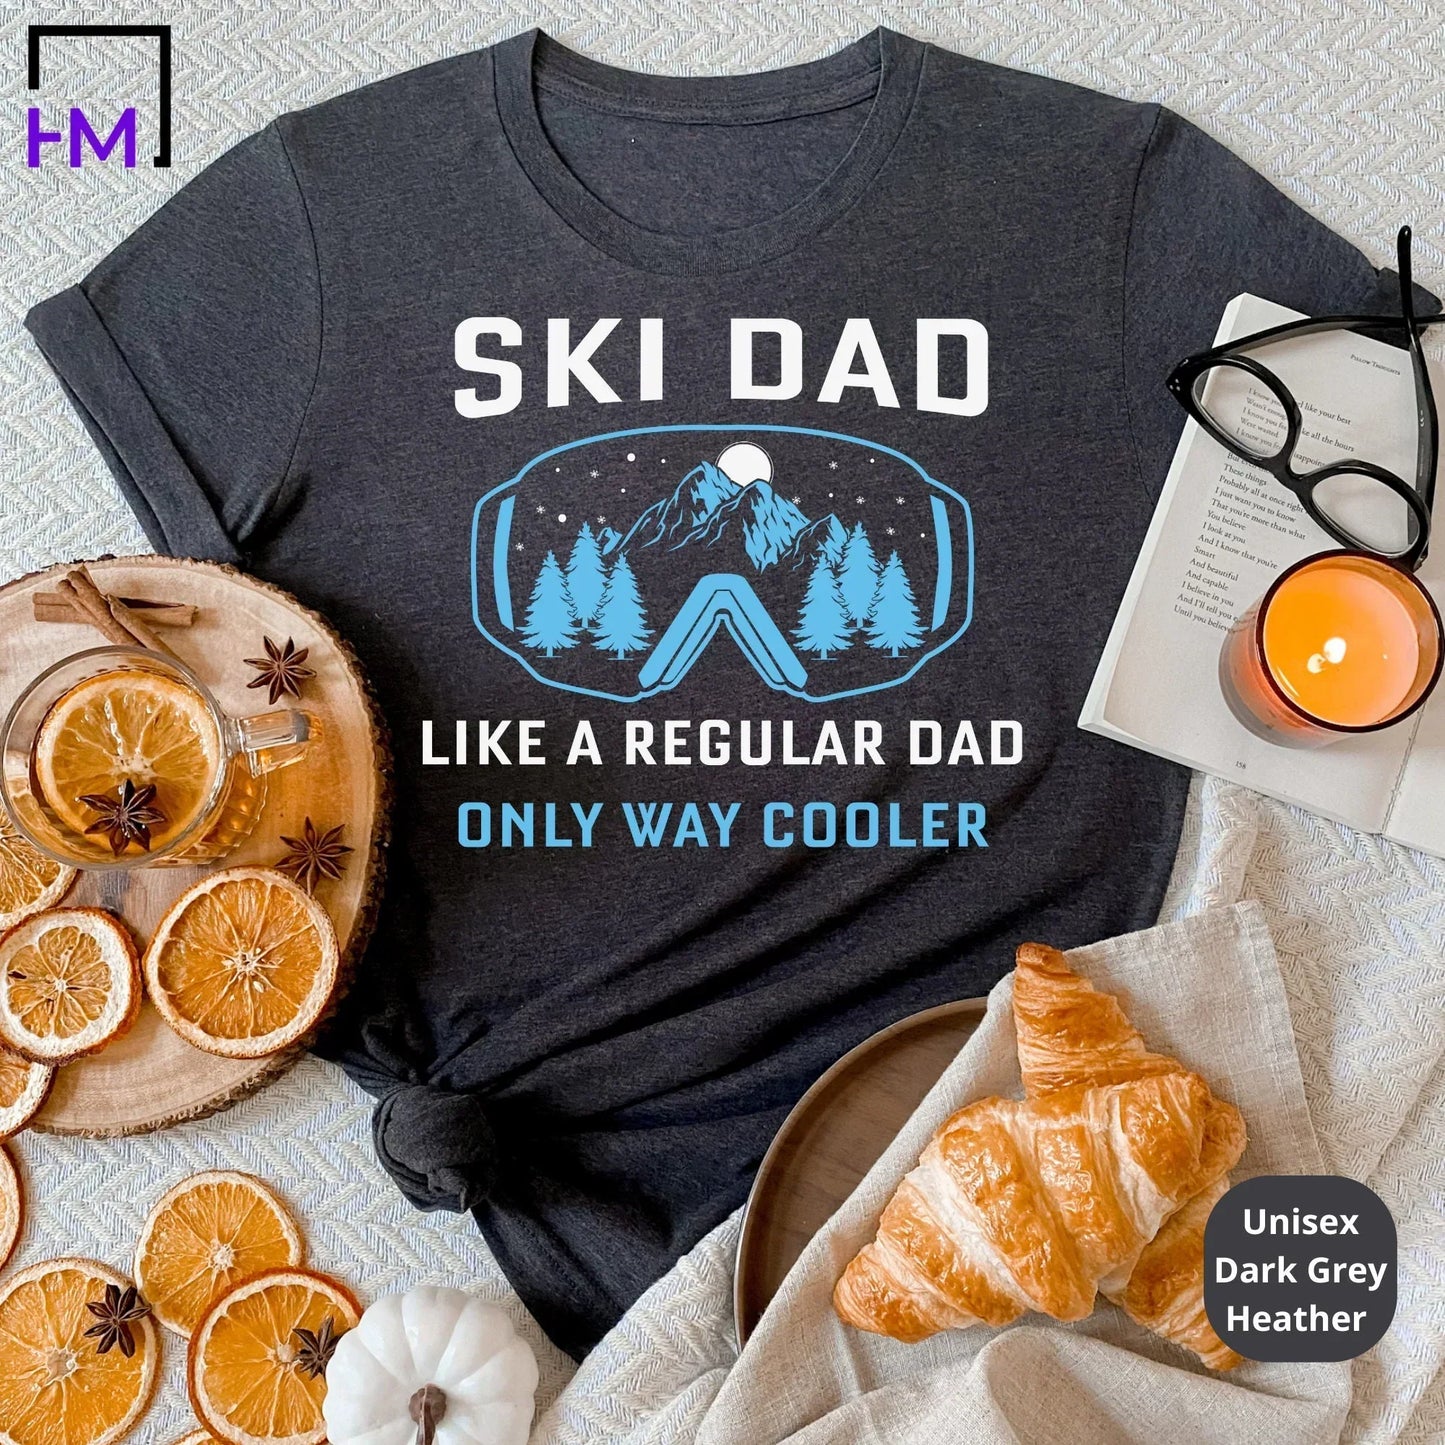 Ski Dad Shirt | Great for New Dads, Soon to Be Daddy, Husband, Boyfriend, Future Father, Co-worker | Christmas, Birthday, Father's Day Gift